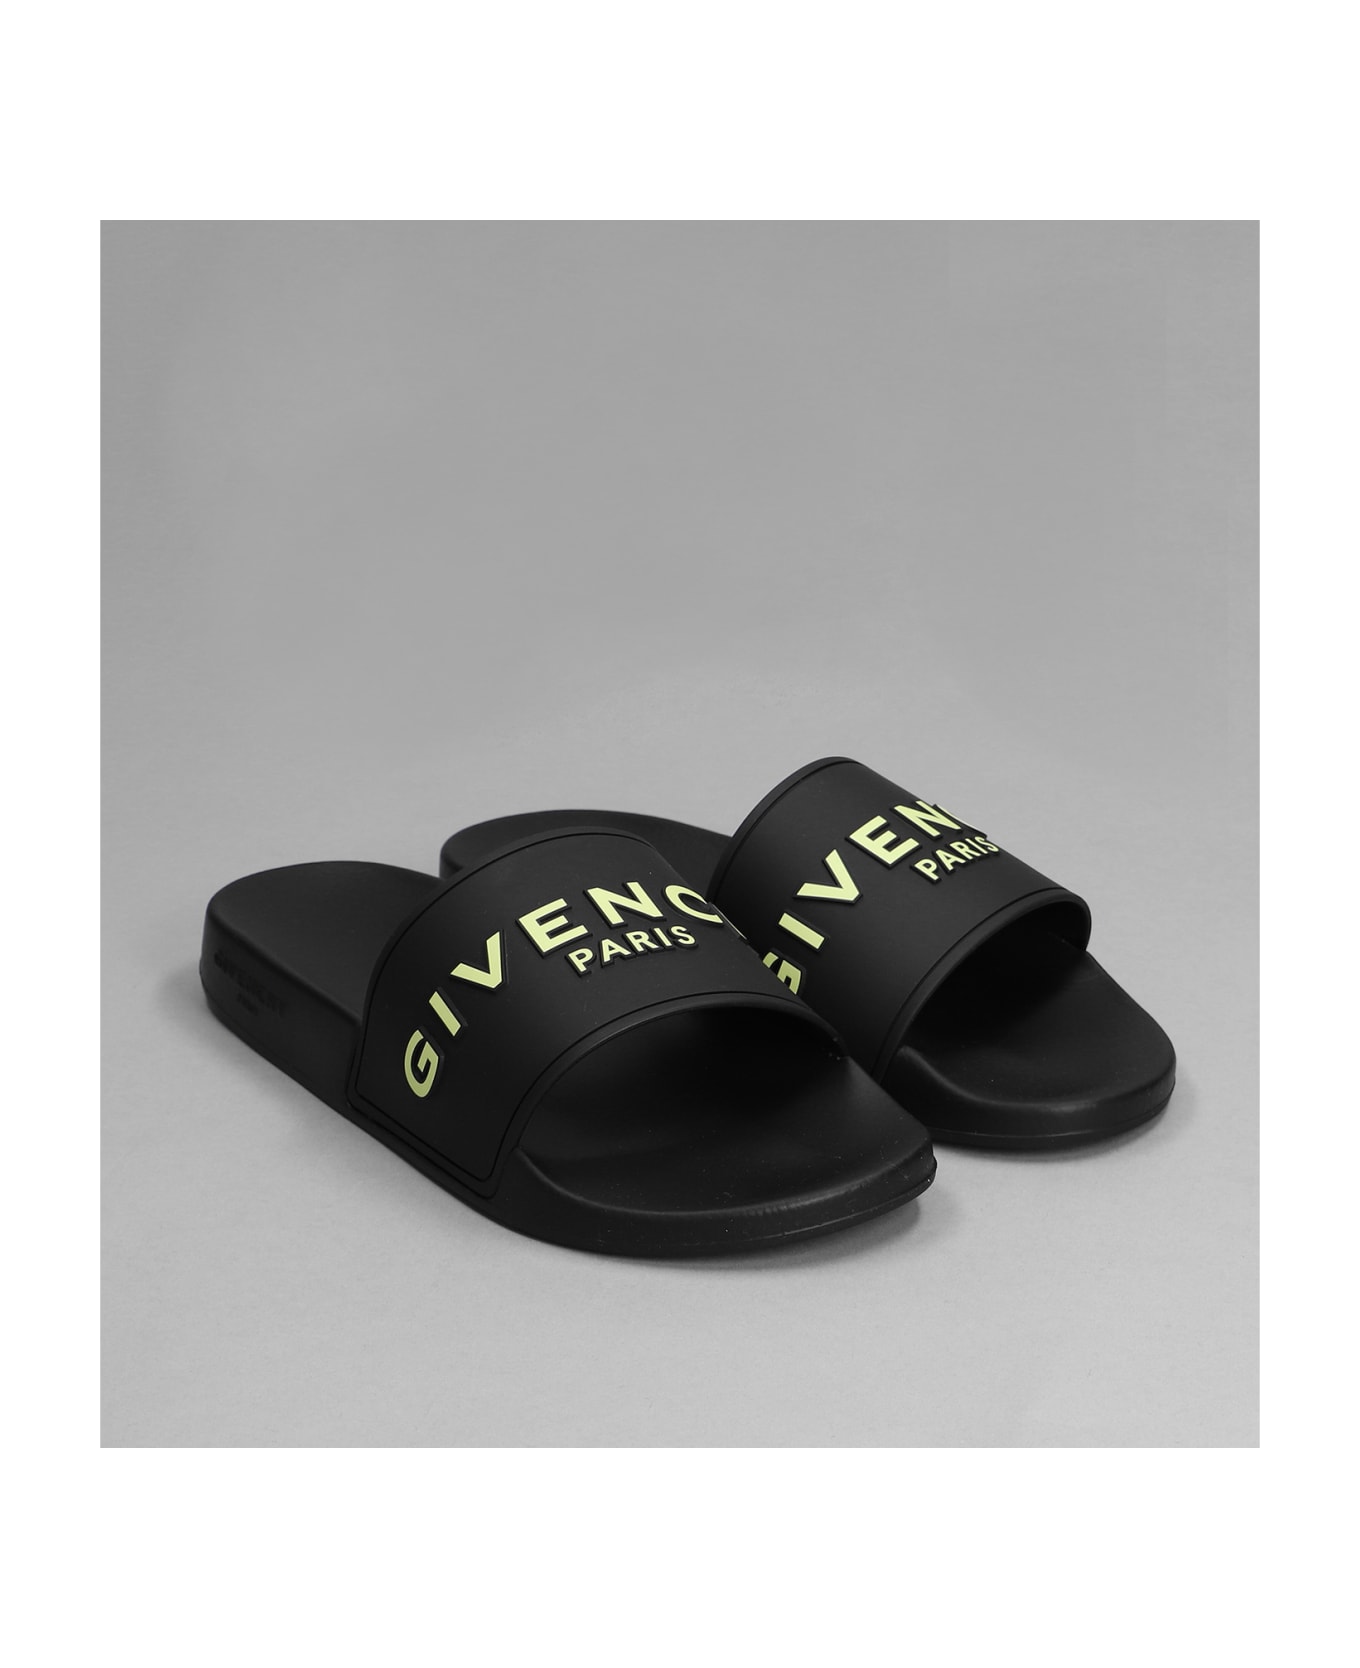 Givenchy Flats In Black Rubber/plasic - black